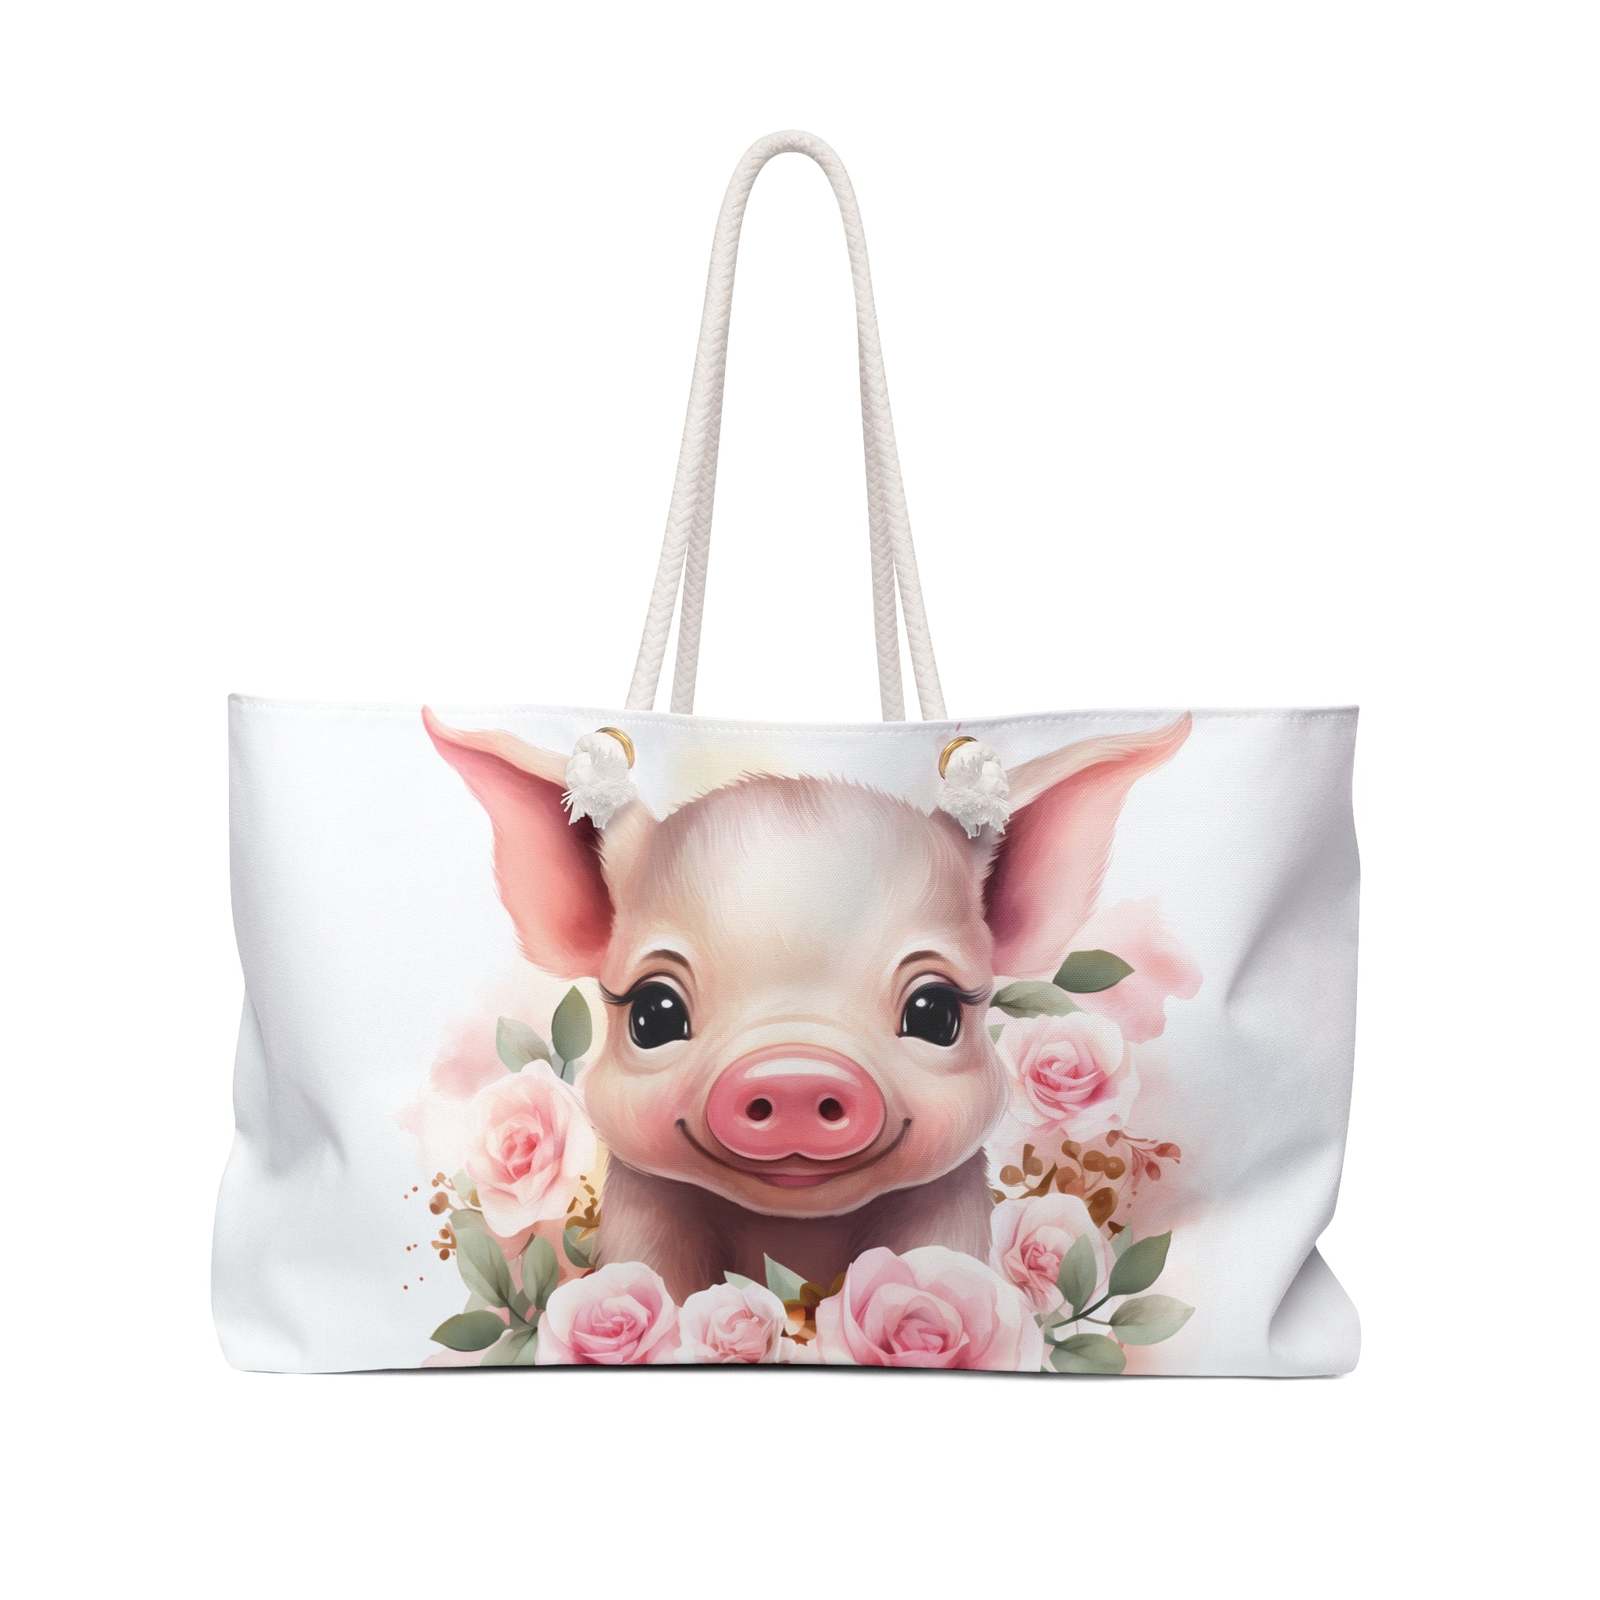 Primary image for Personalised/Non-Personalised Weekender Bag, Pig with Pink Roses, awd-253